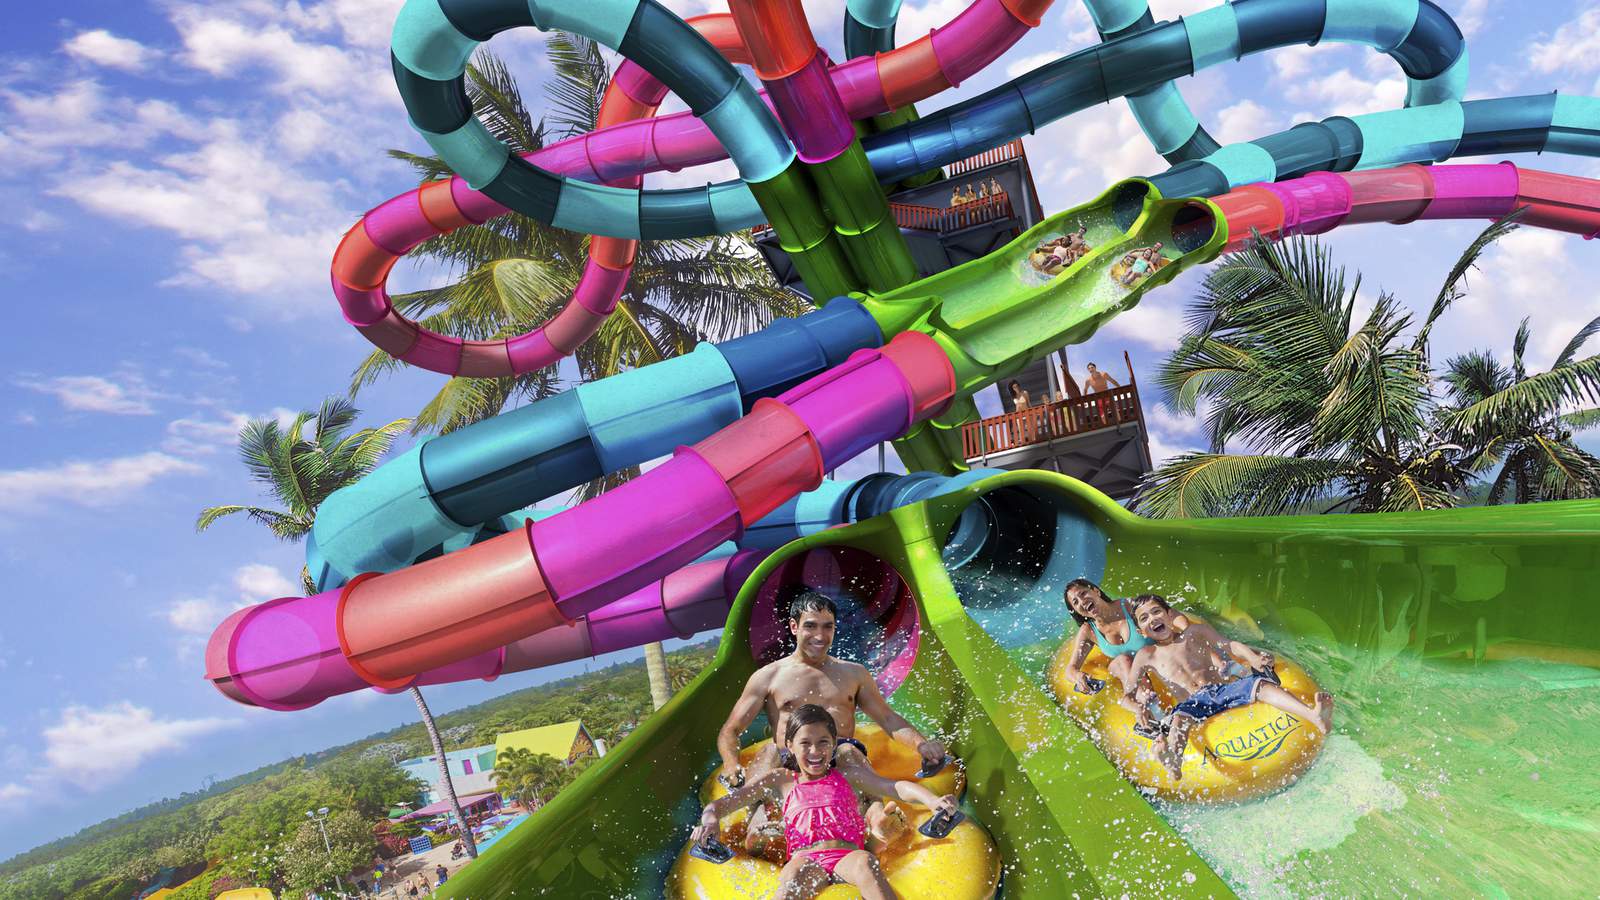 RipTide Race is the 50th slide to open at SeaWorld’s Aquatica